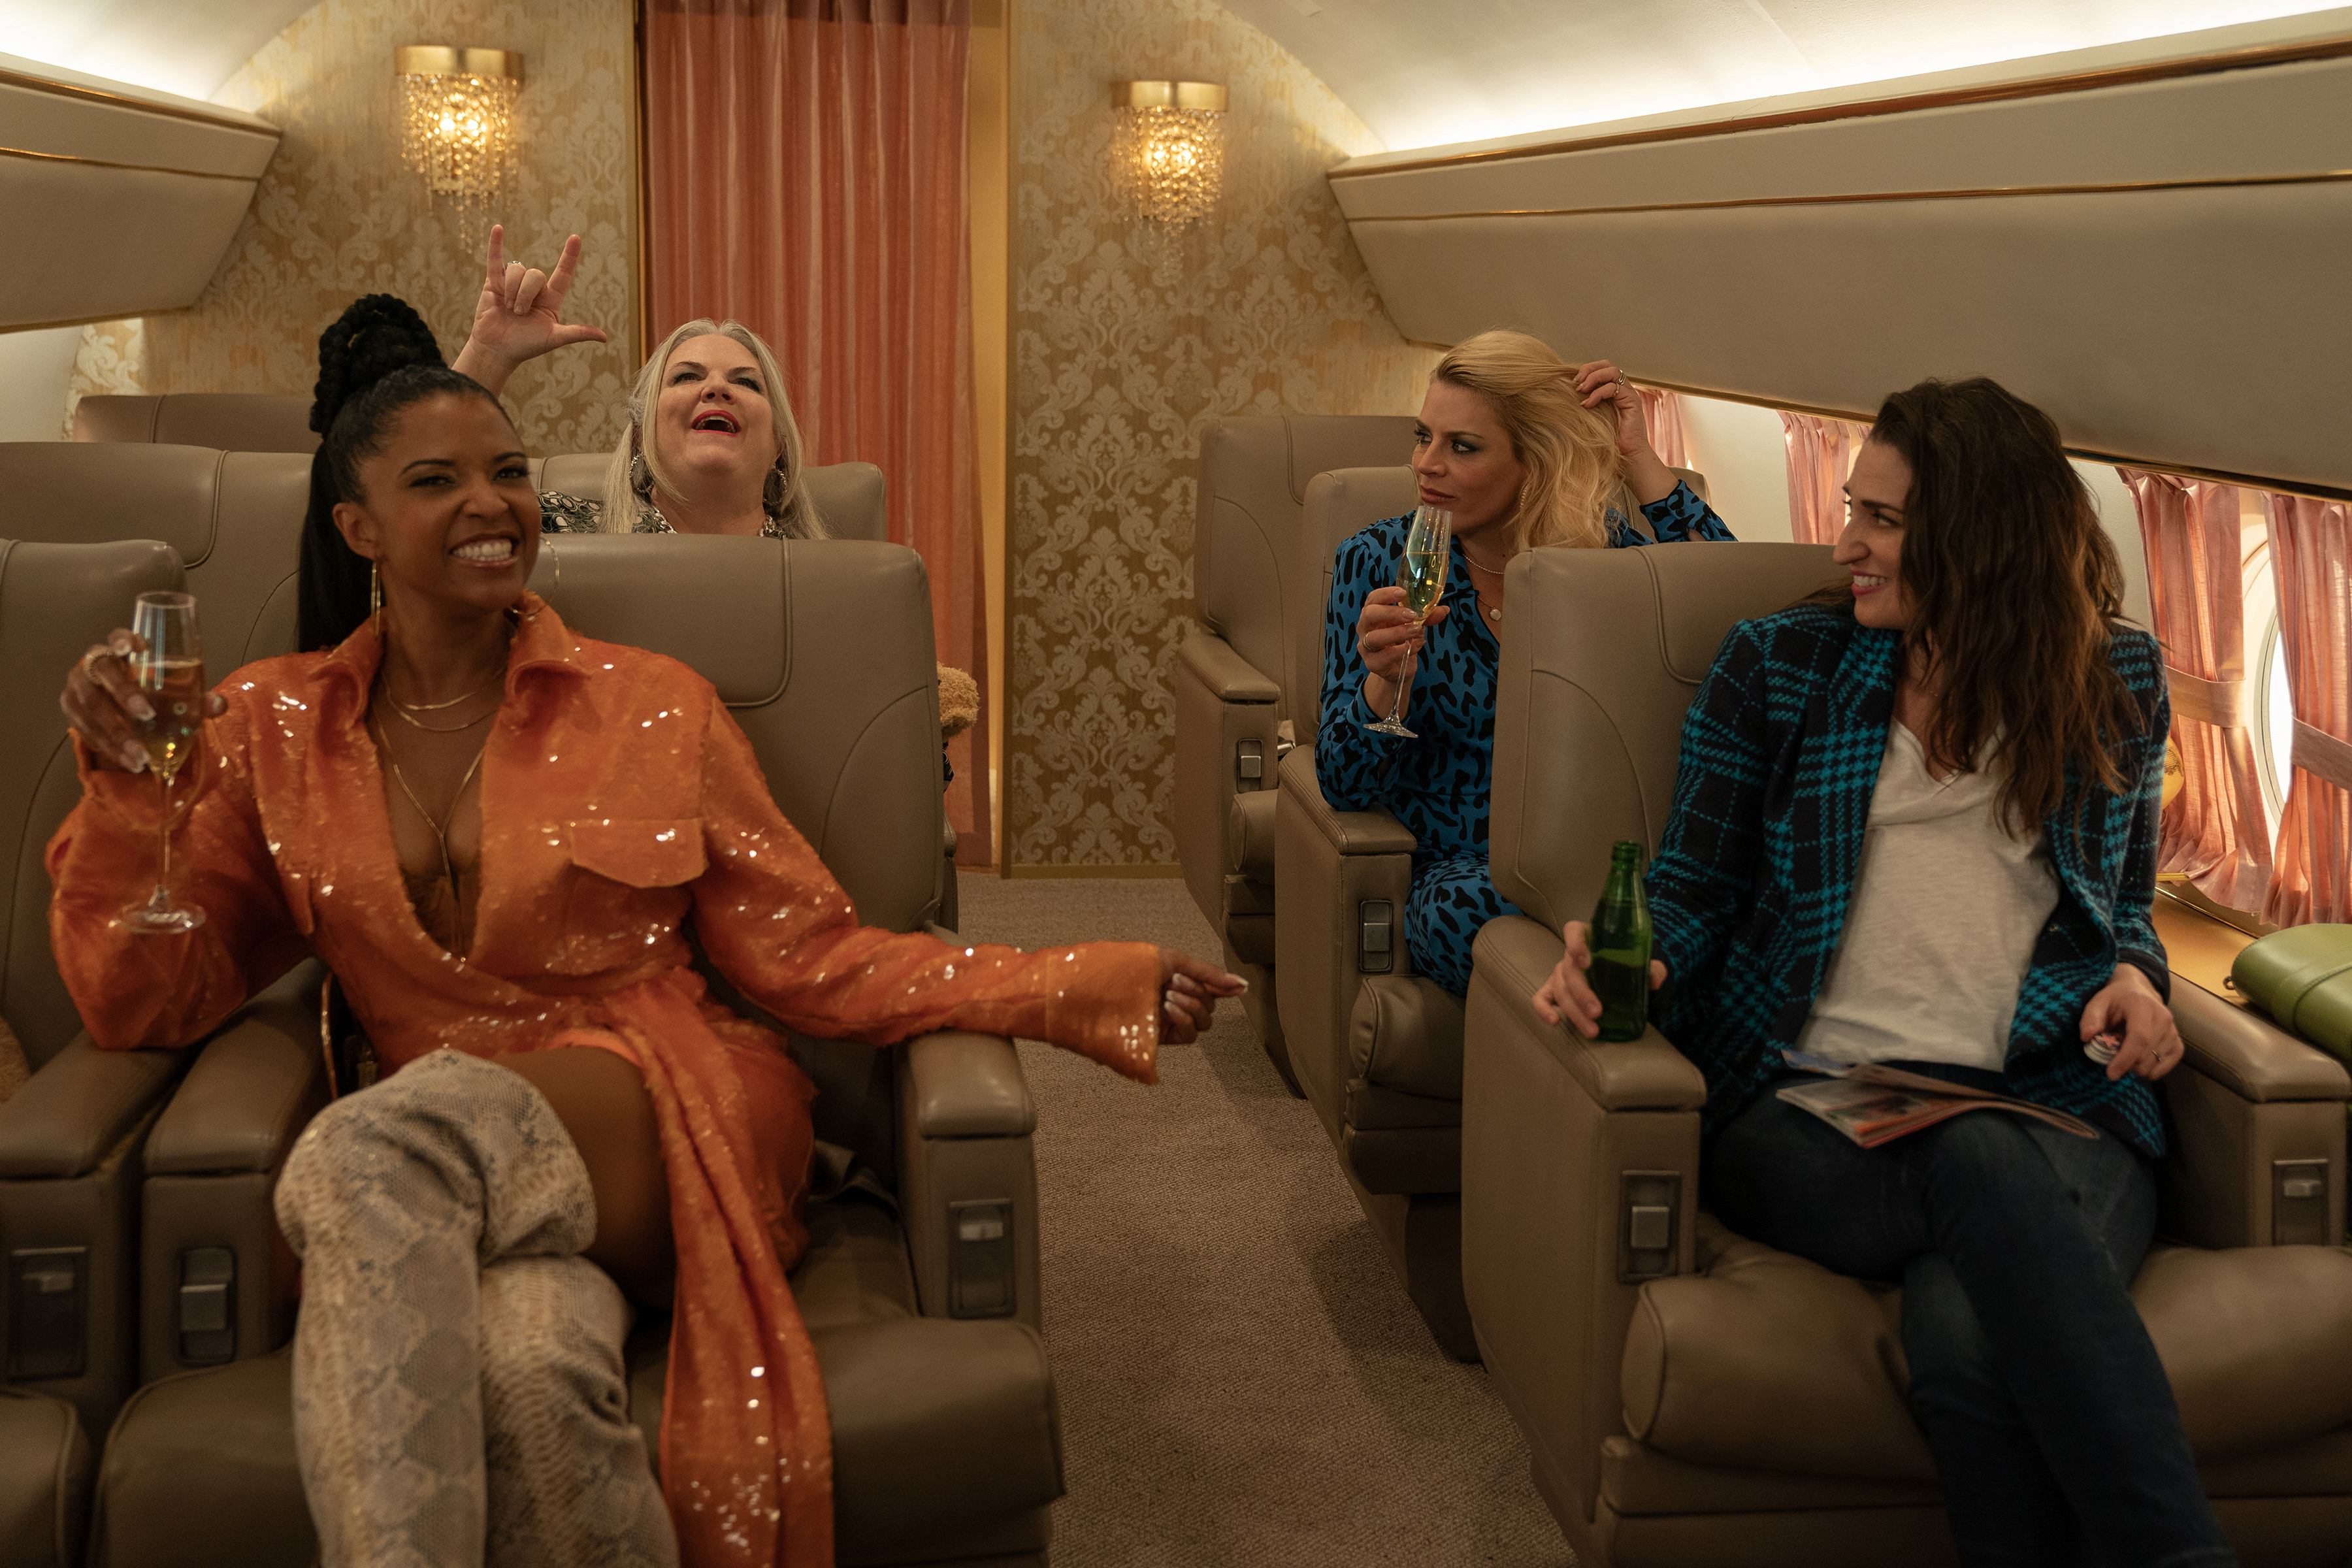 The cast of Girls5Eva sitting together on a private plane